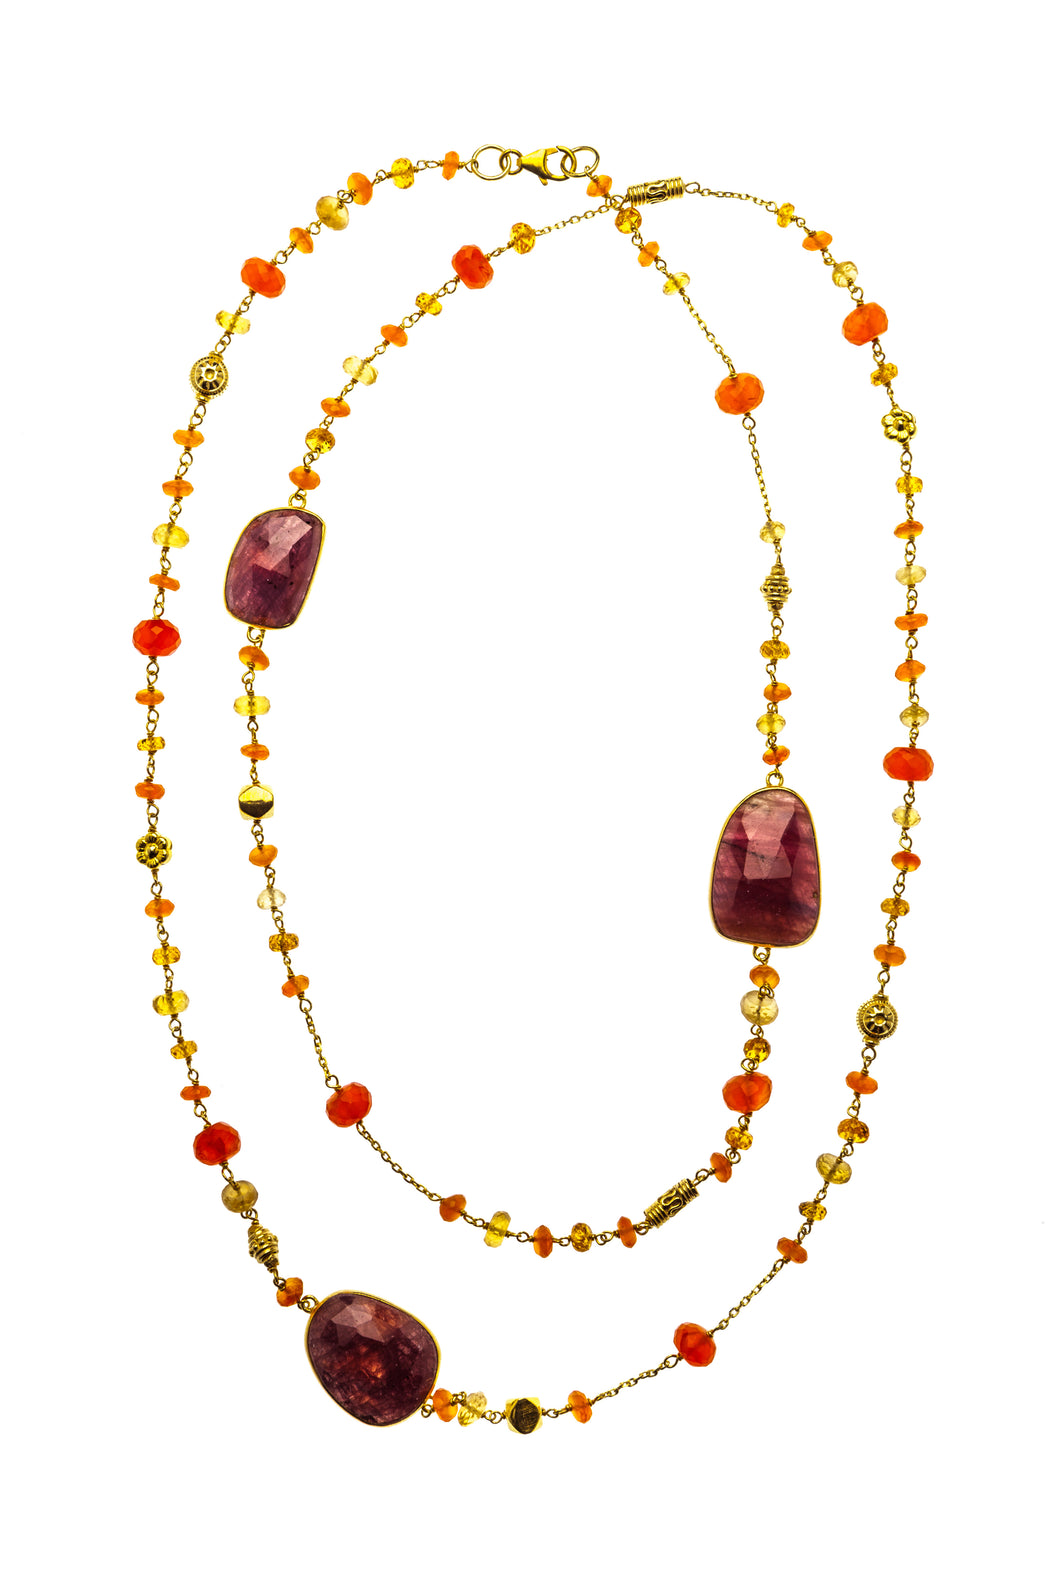 40-inch Gemstone Necklace with Brilliant Red Sapphire Slices in 24kt gold vermeil N004-Car